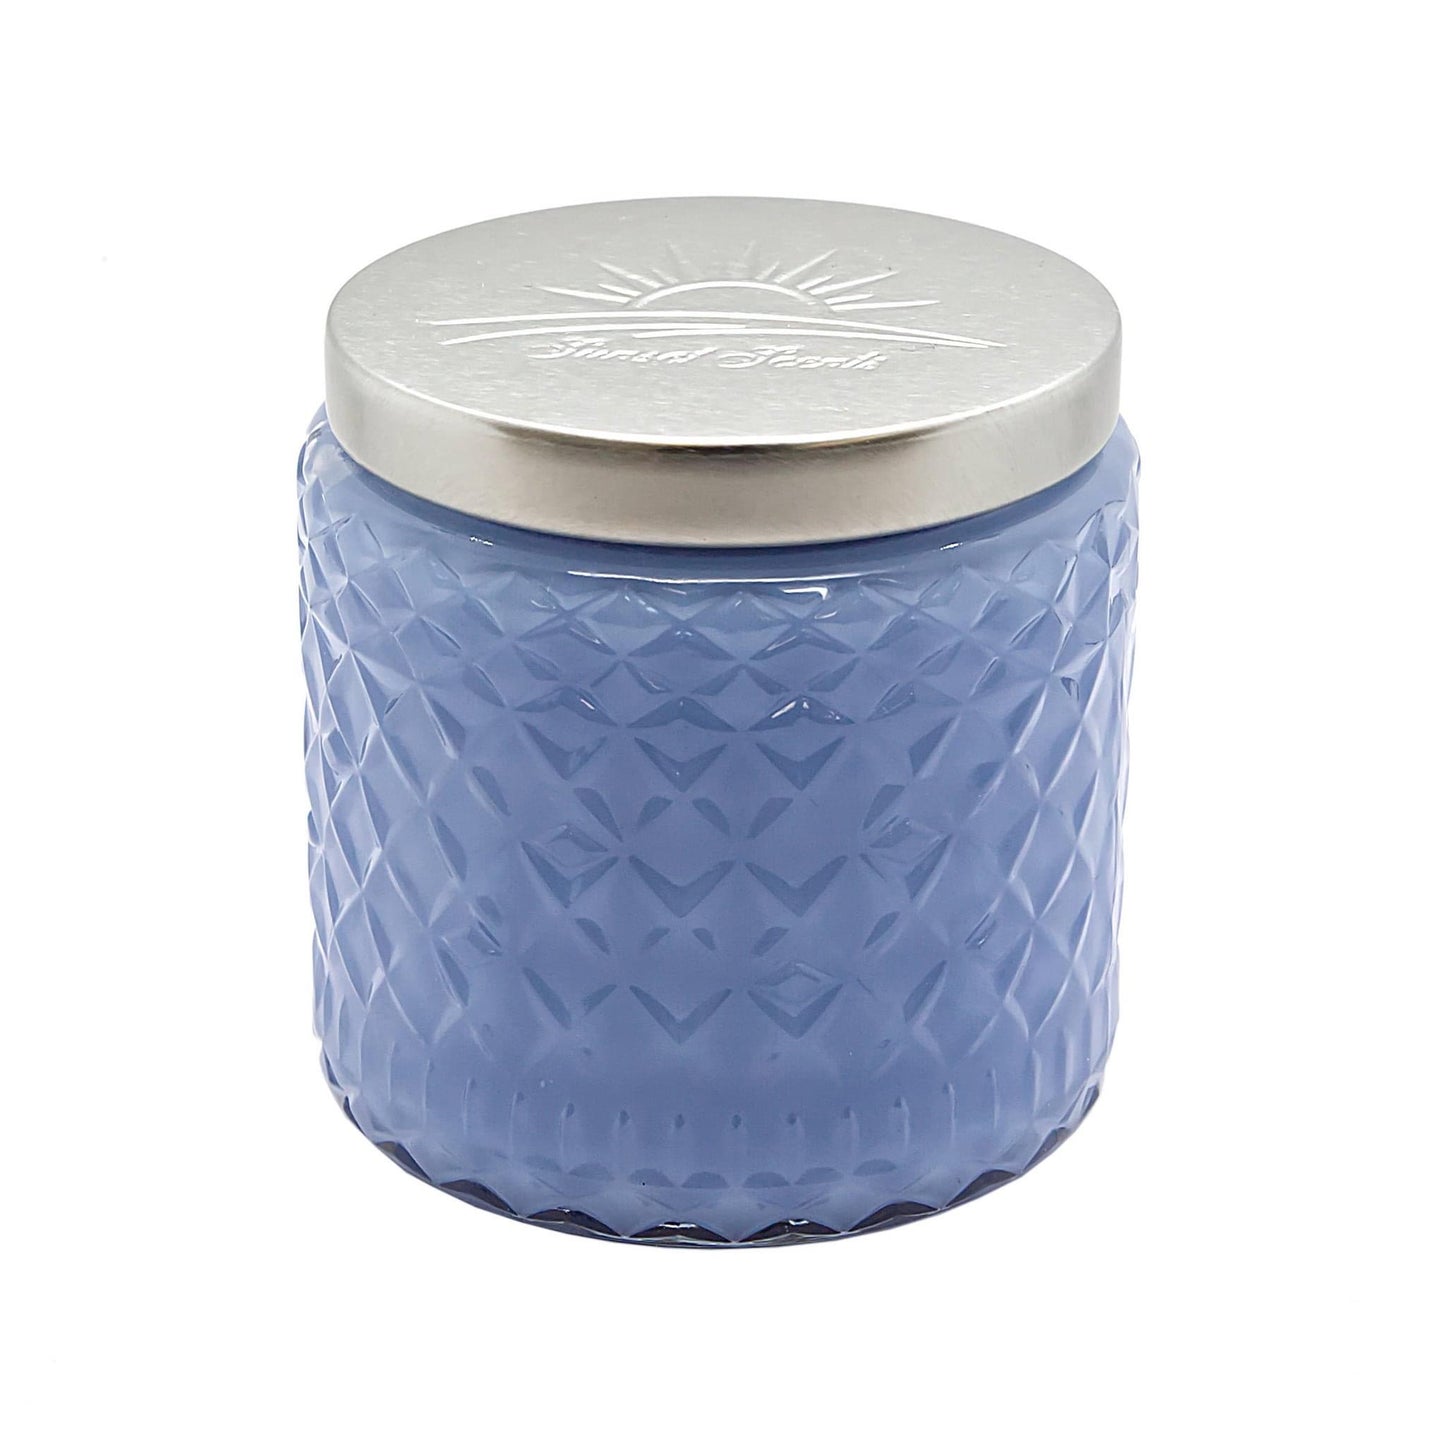 Rainshower Scented Candle